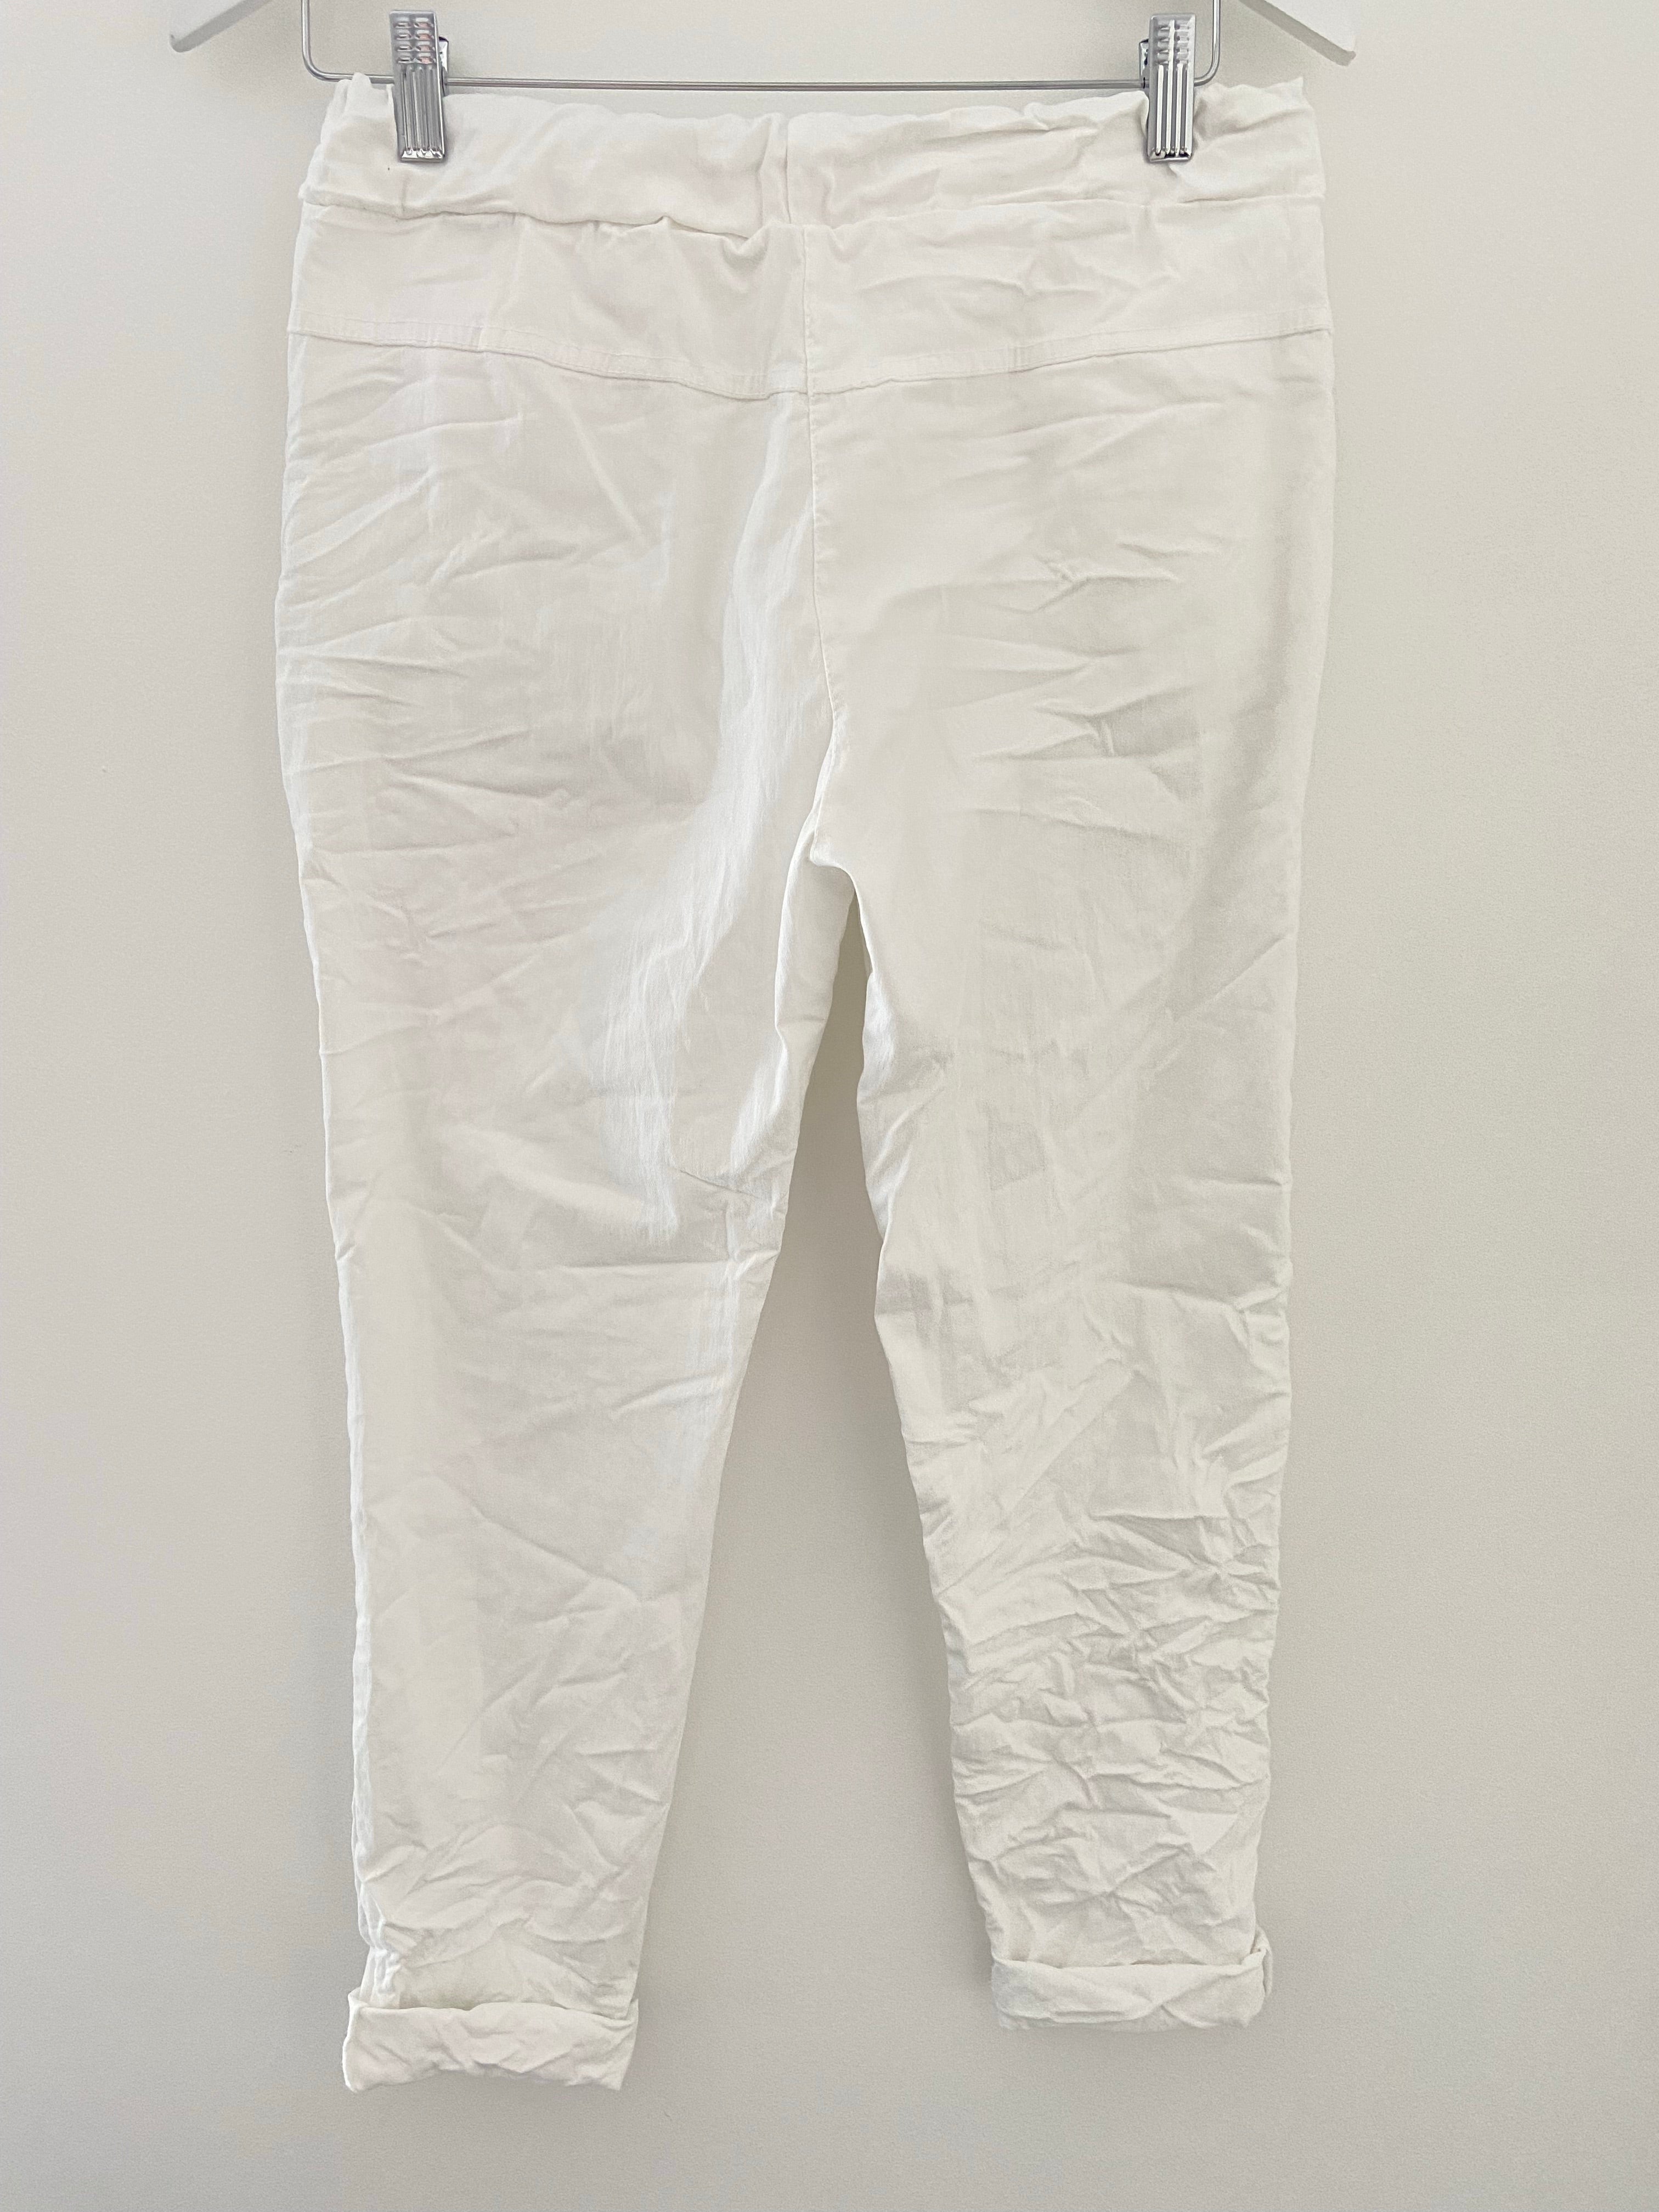 Slimfit Cotton Stretch Joggers in White